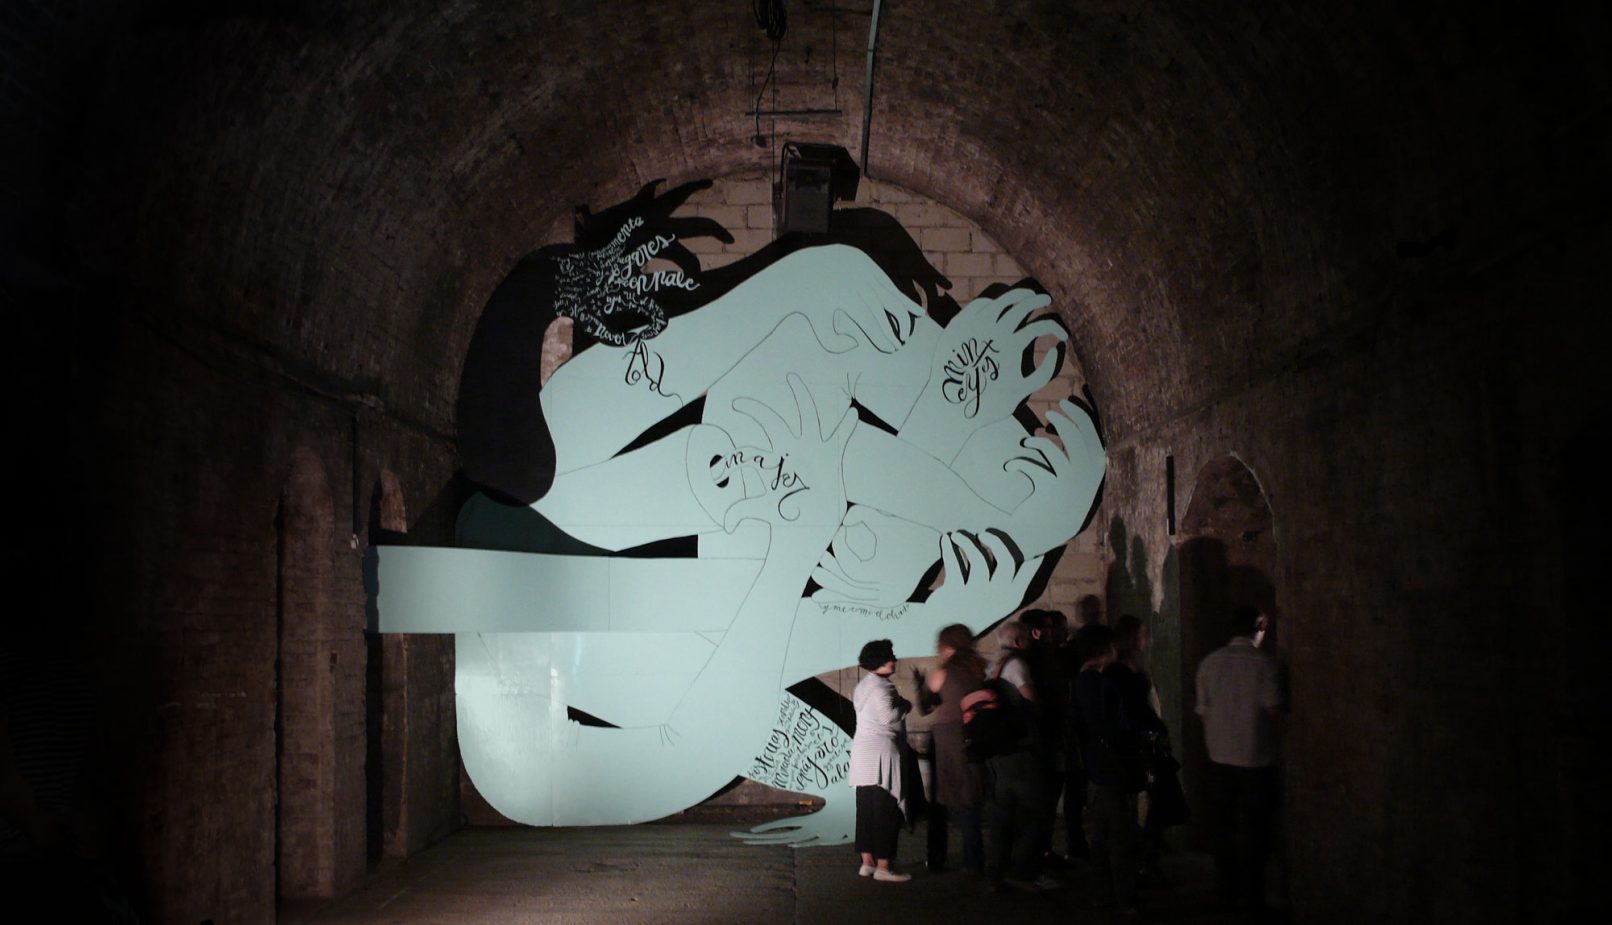 Nudo with people walking by, a 11.50 x 5 m installation created in the massive Shunt Vaults